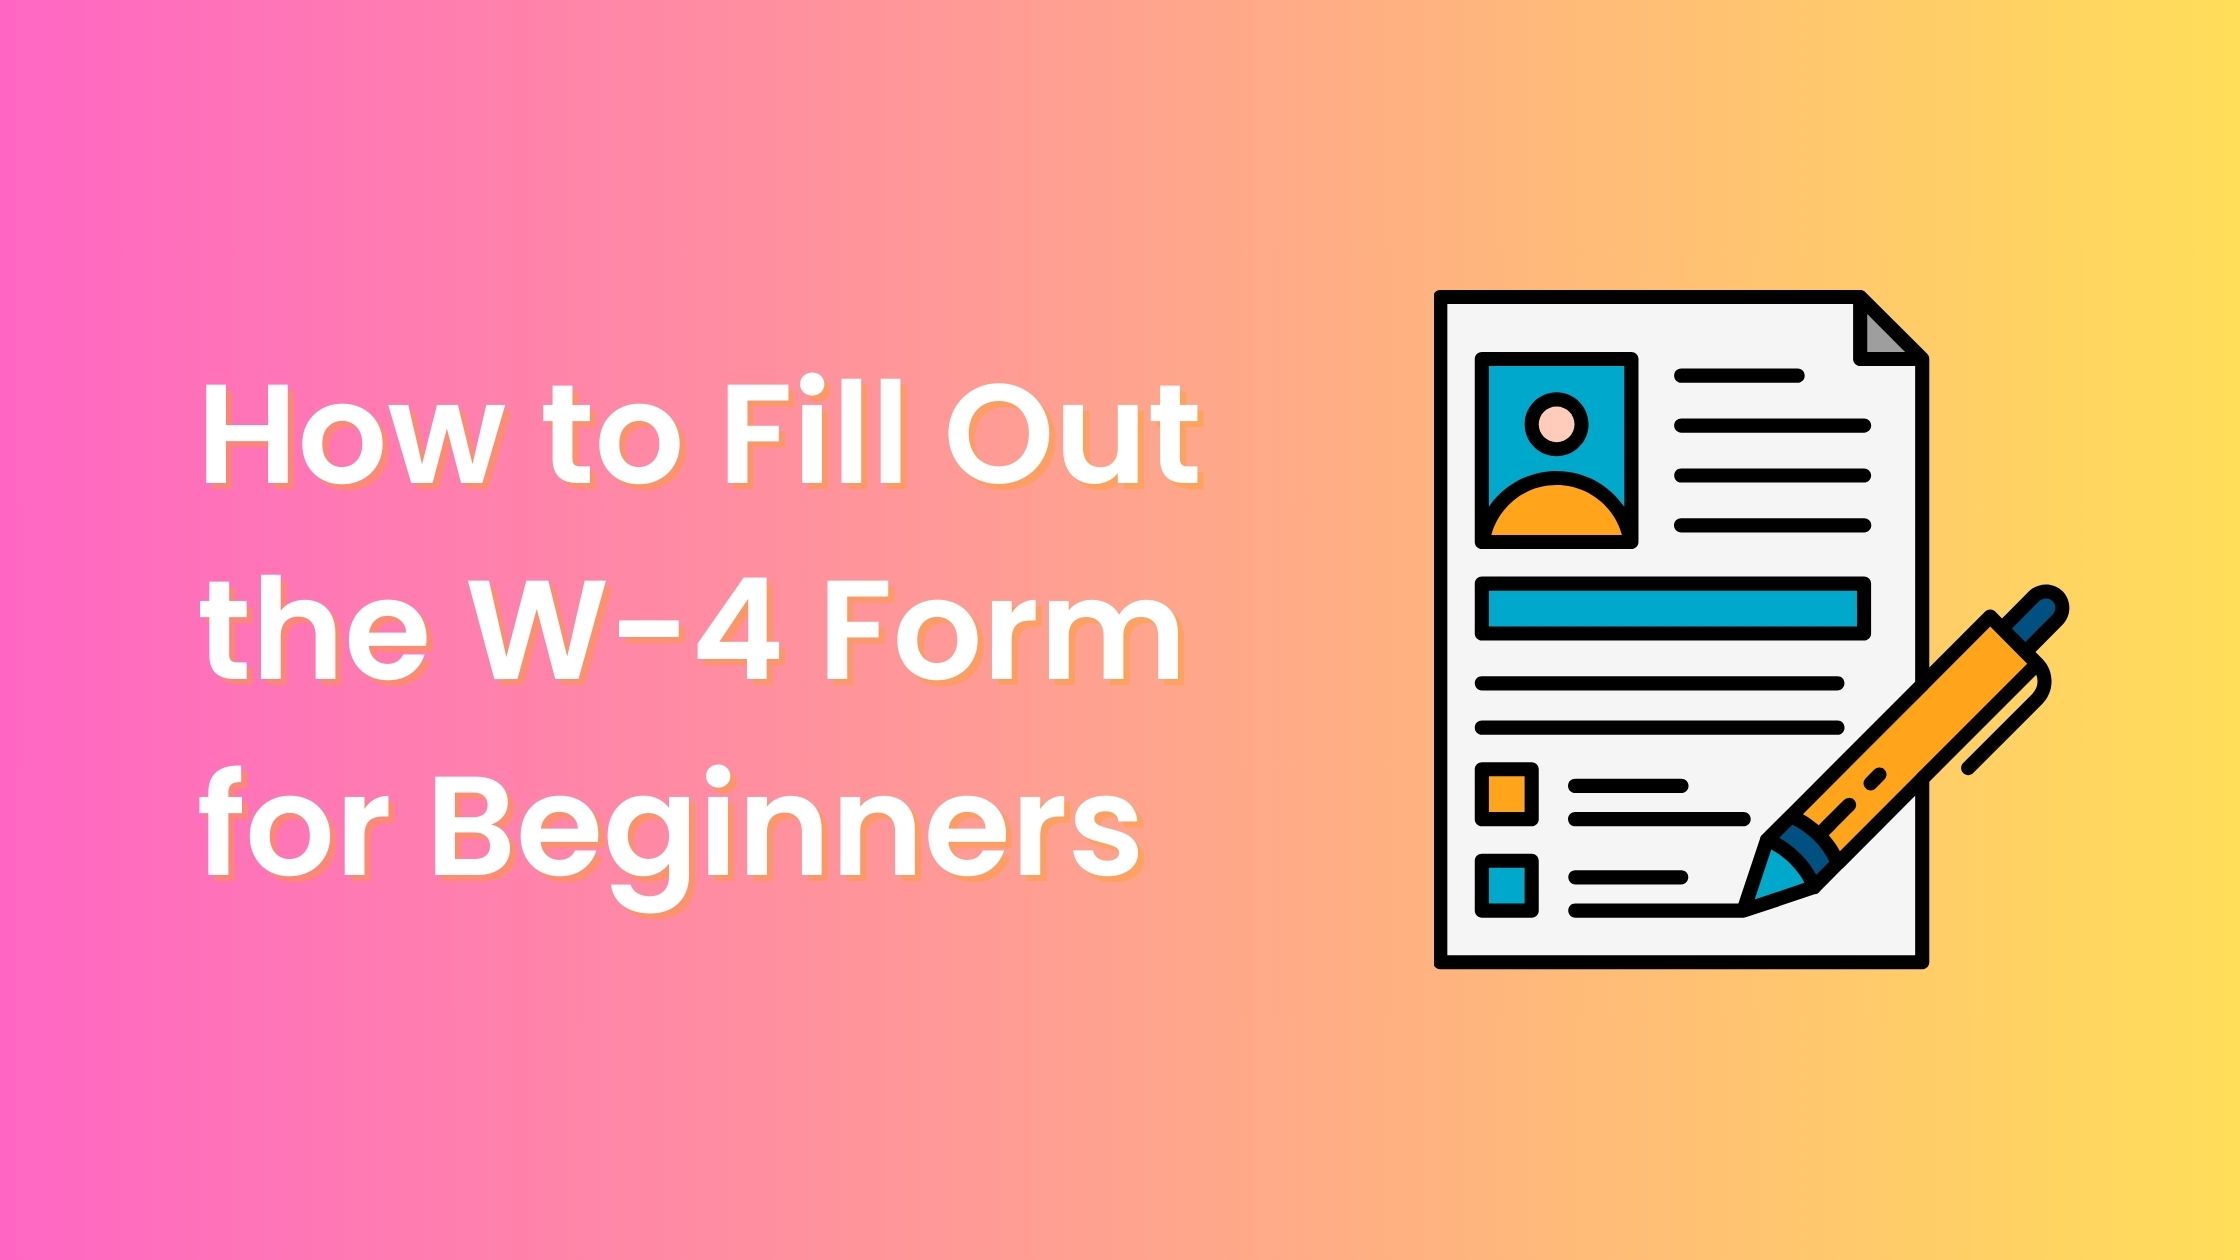 How to Fill Out the W-4 Form for Beginners A Step-by-Step Guide